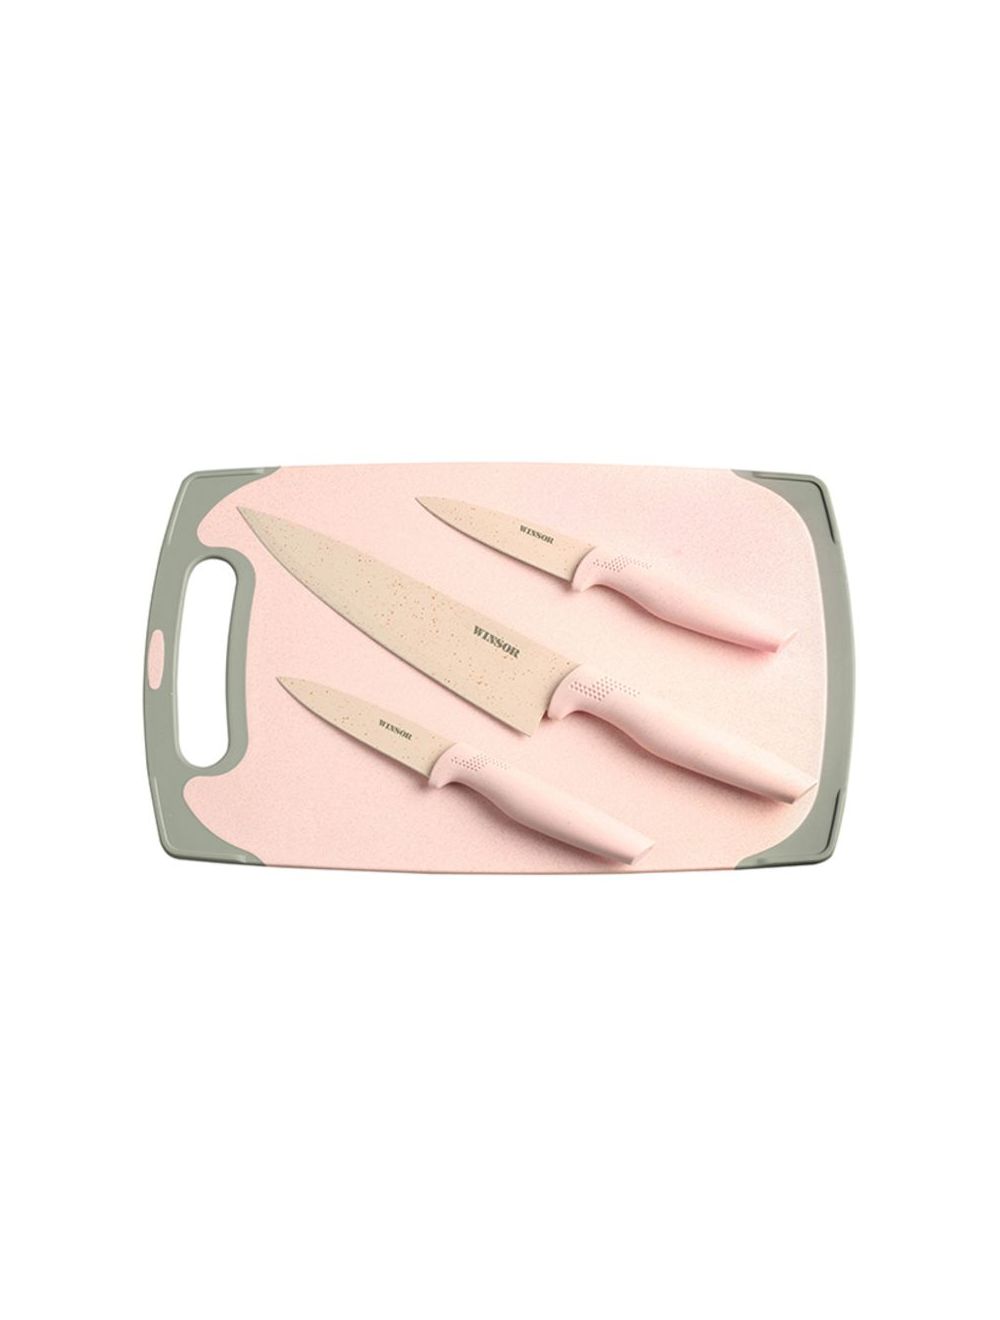 Winsor Cutting Board With Knfie Set - Pink-WR6093-P